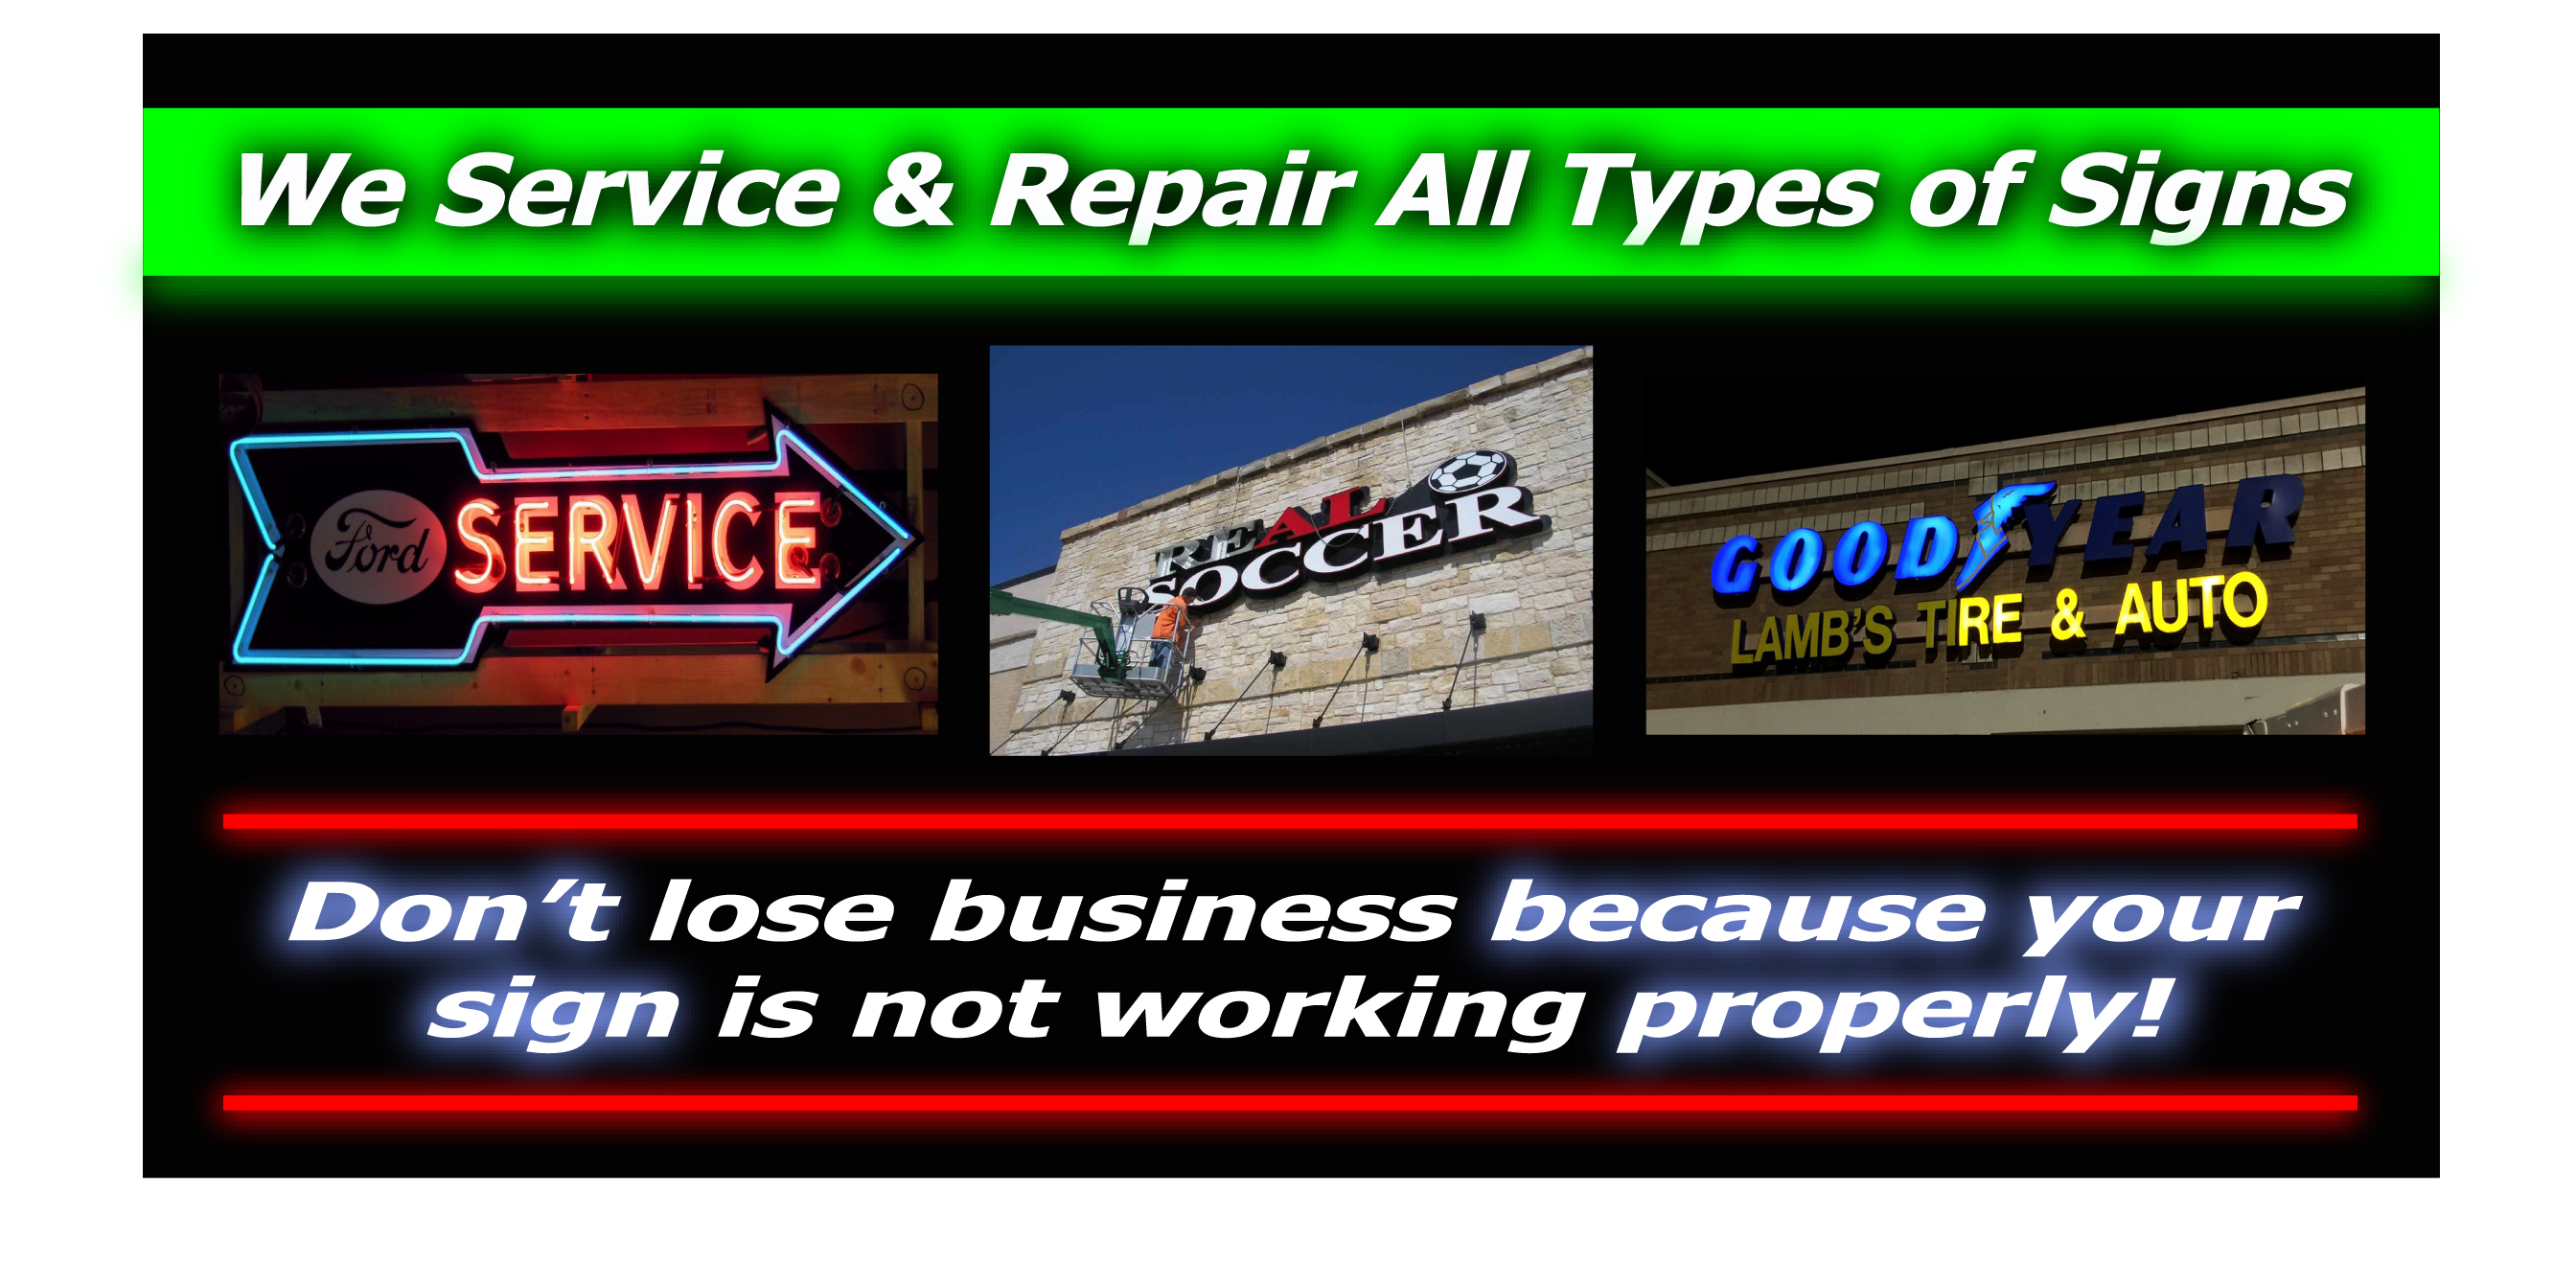 We Service and Repair All Types of Signs